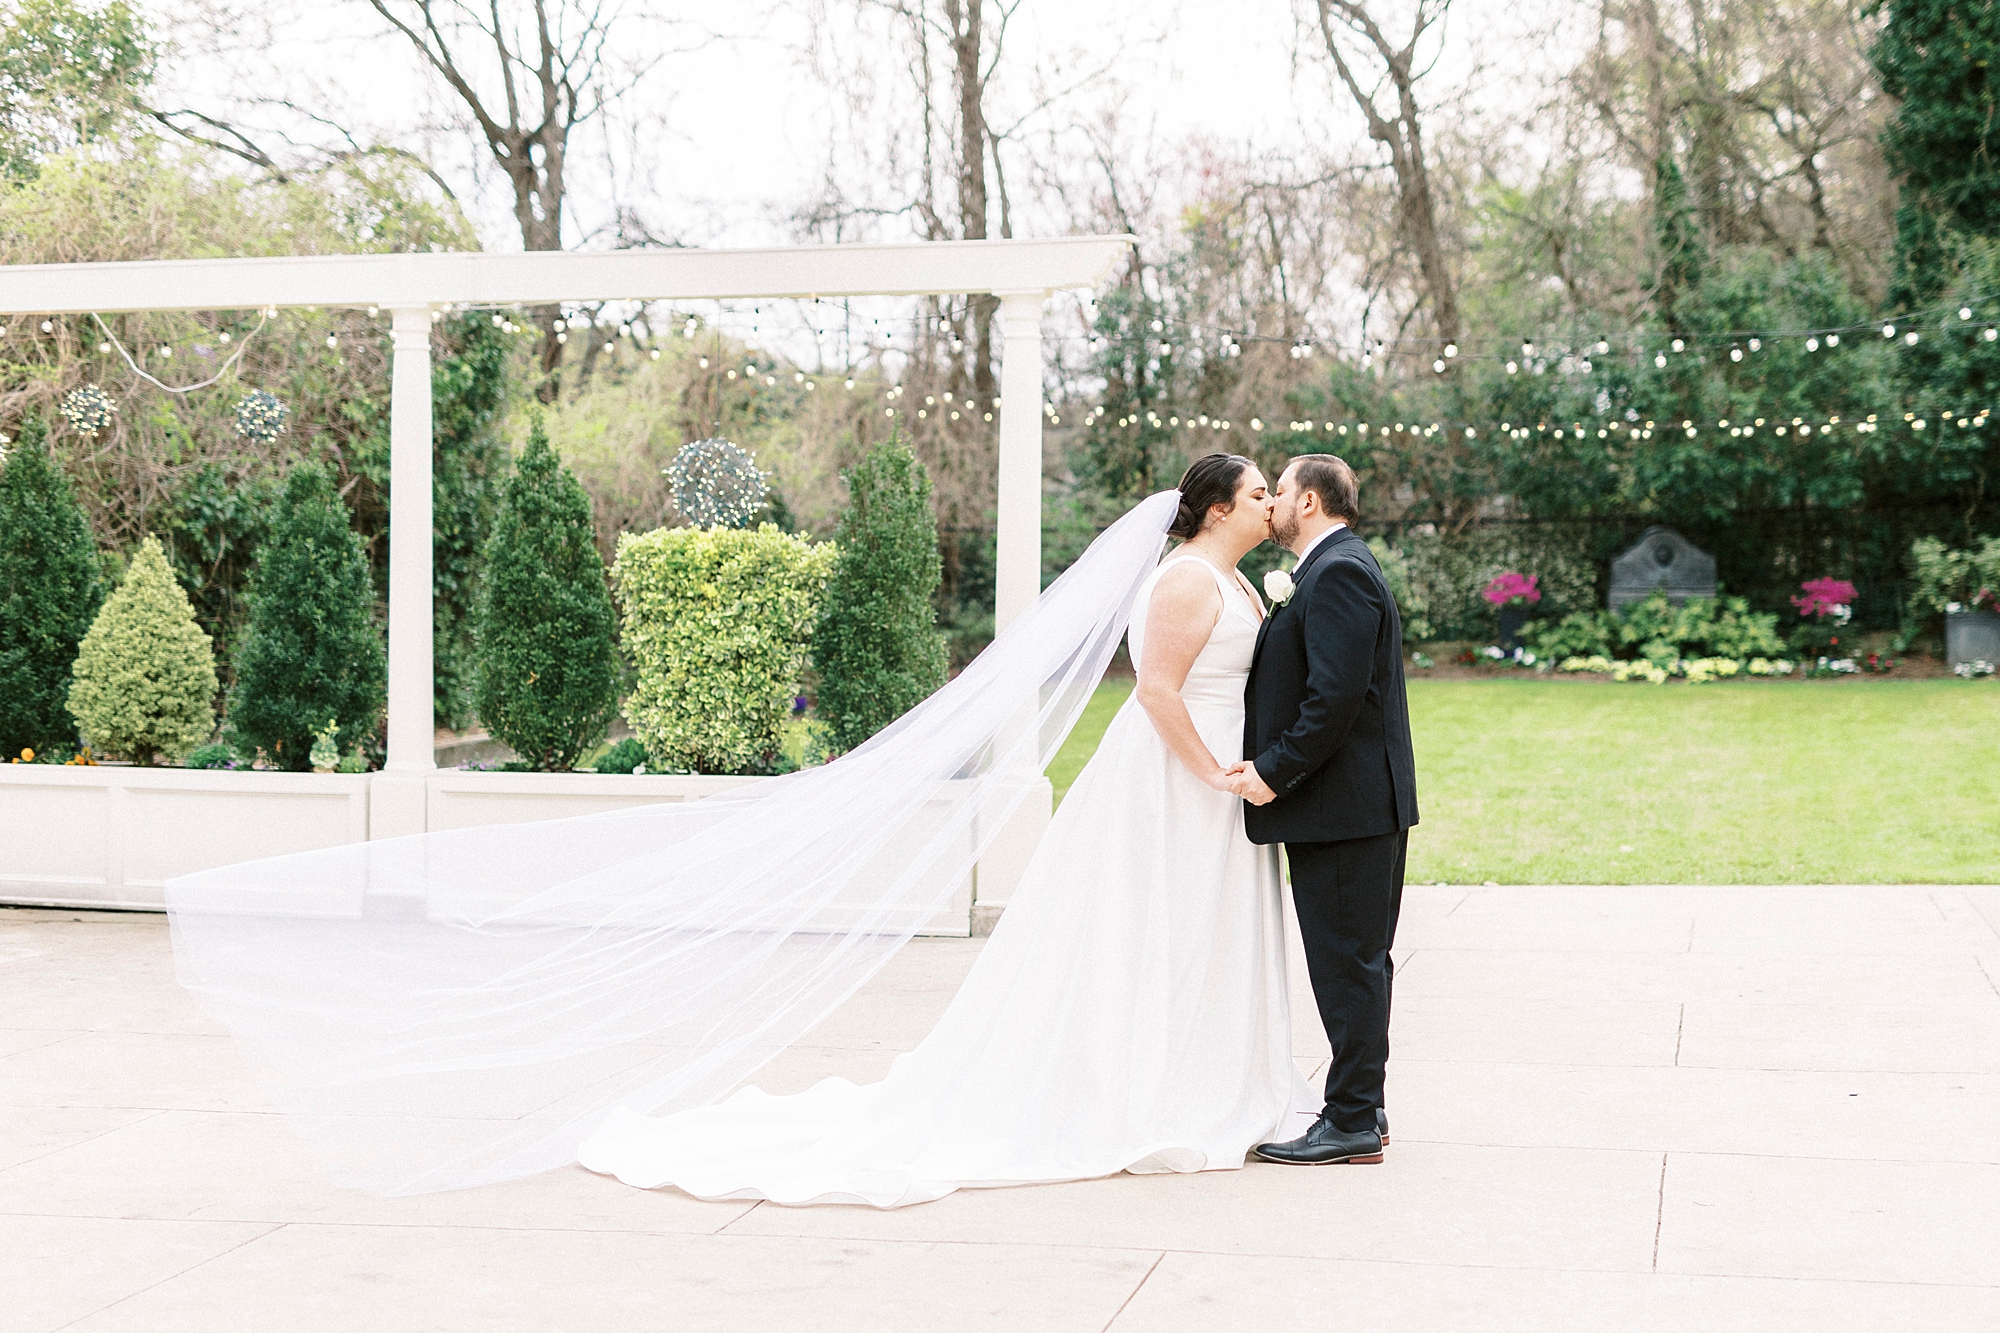 newlyweds hold hands while bride's veil floats behind them in garden at Separk Mansion